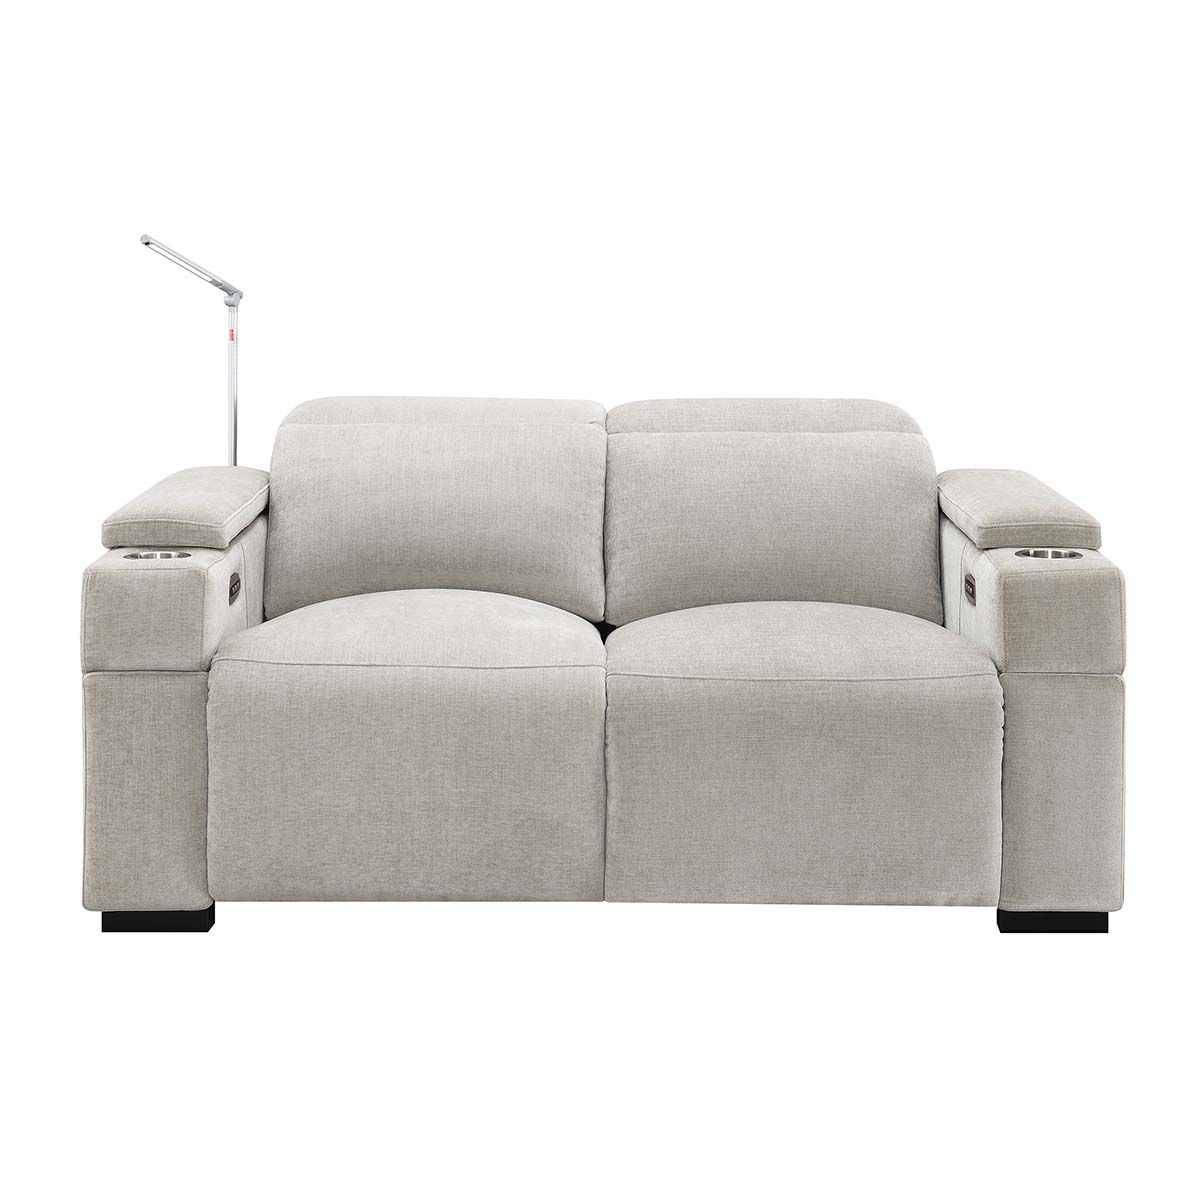 RowOne Calveri - Taupe Patterned Polyester Microfiber Fabric - Loveseat - front view